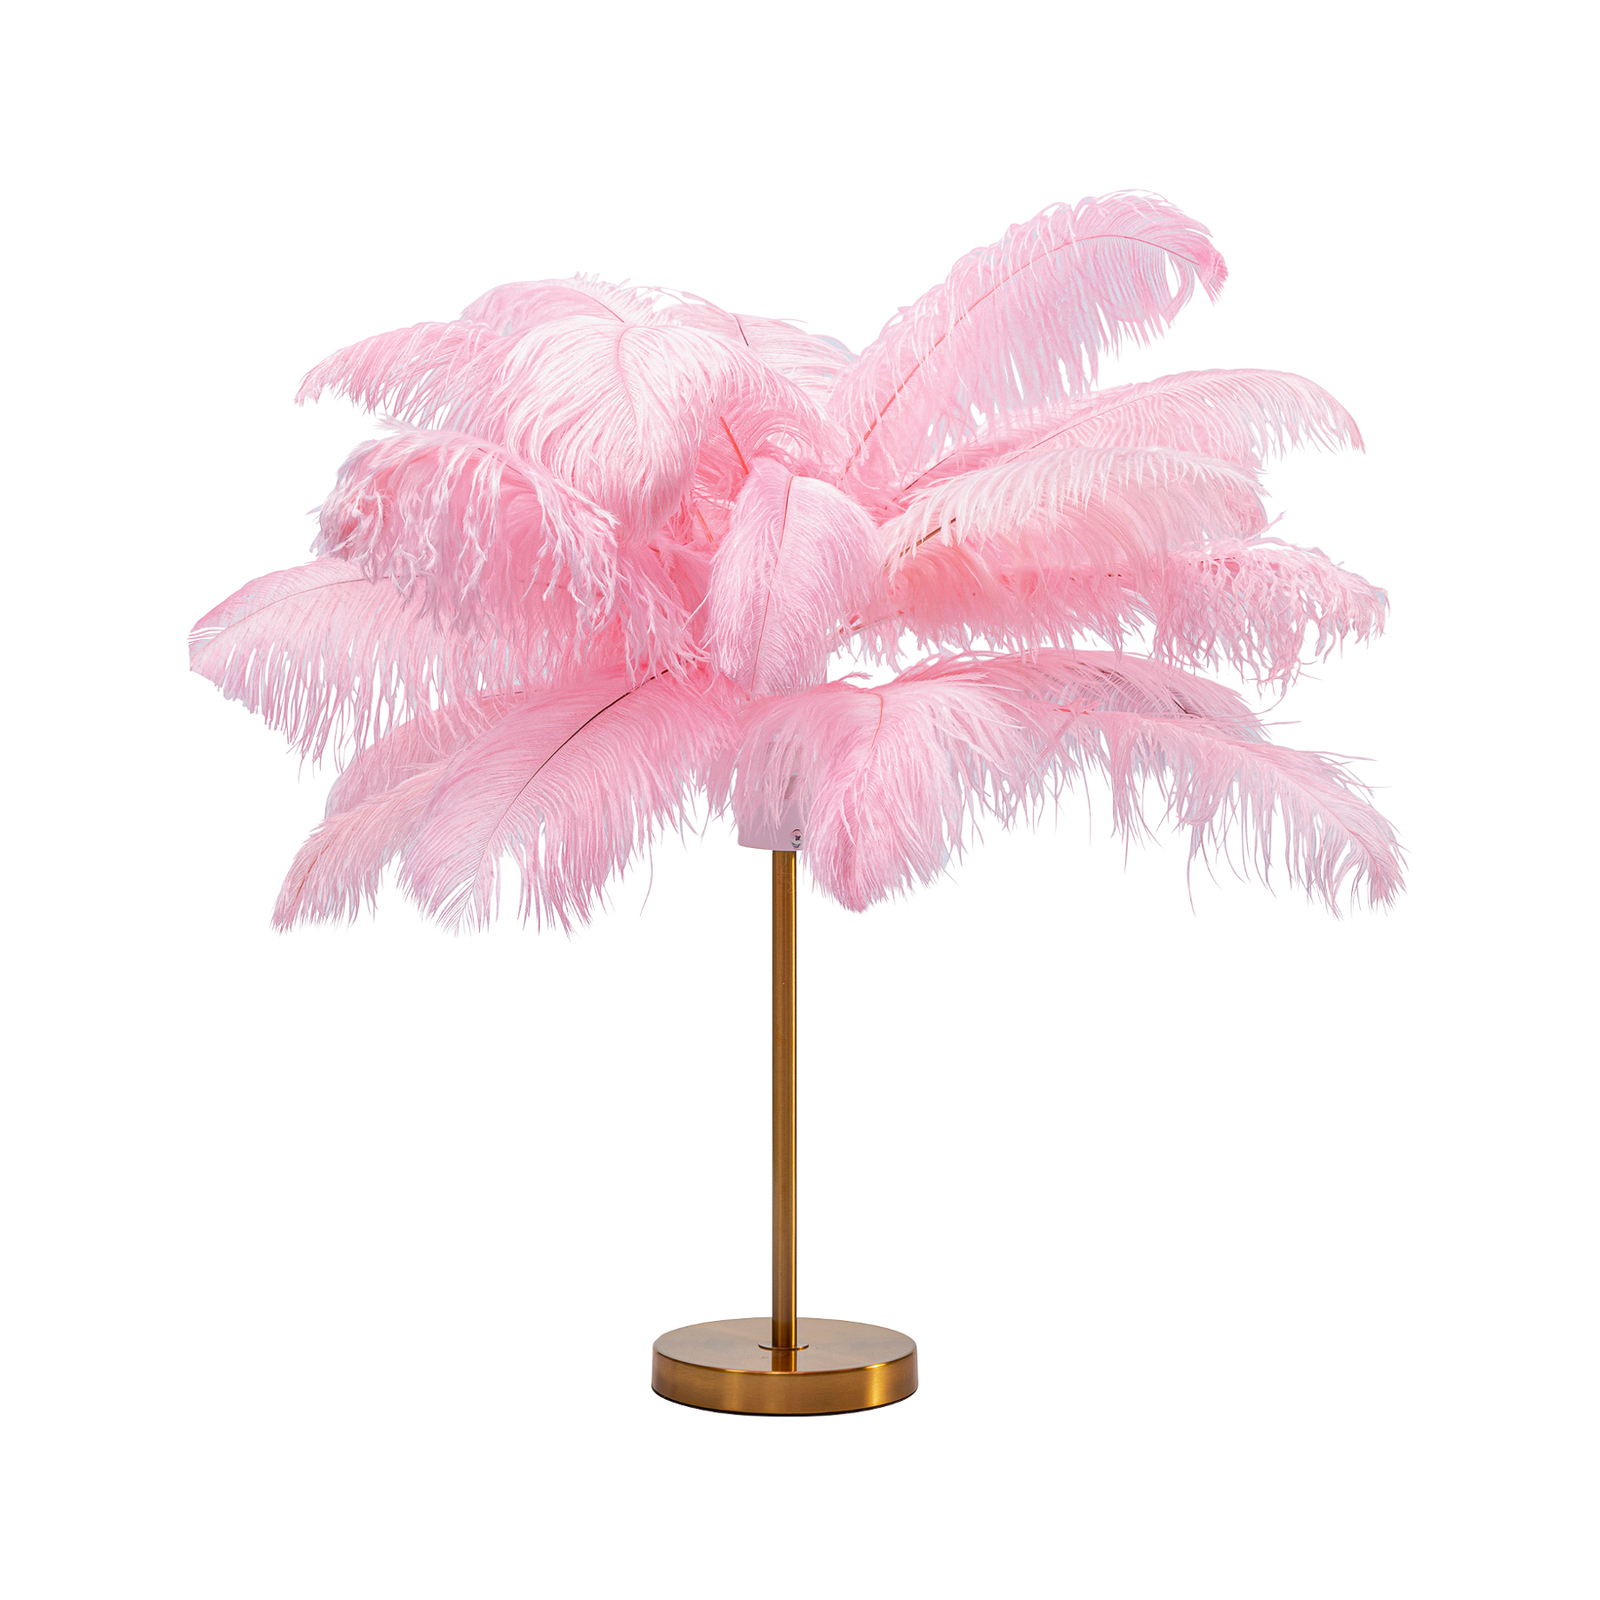 KARE Feather Palm lampe à poser plumes, rose